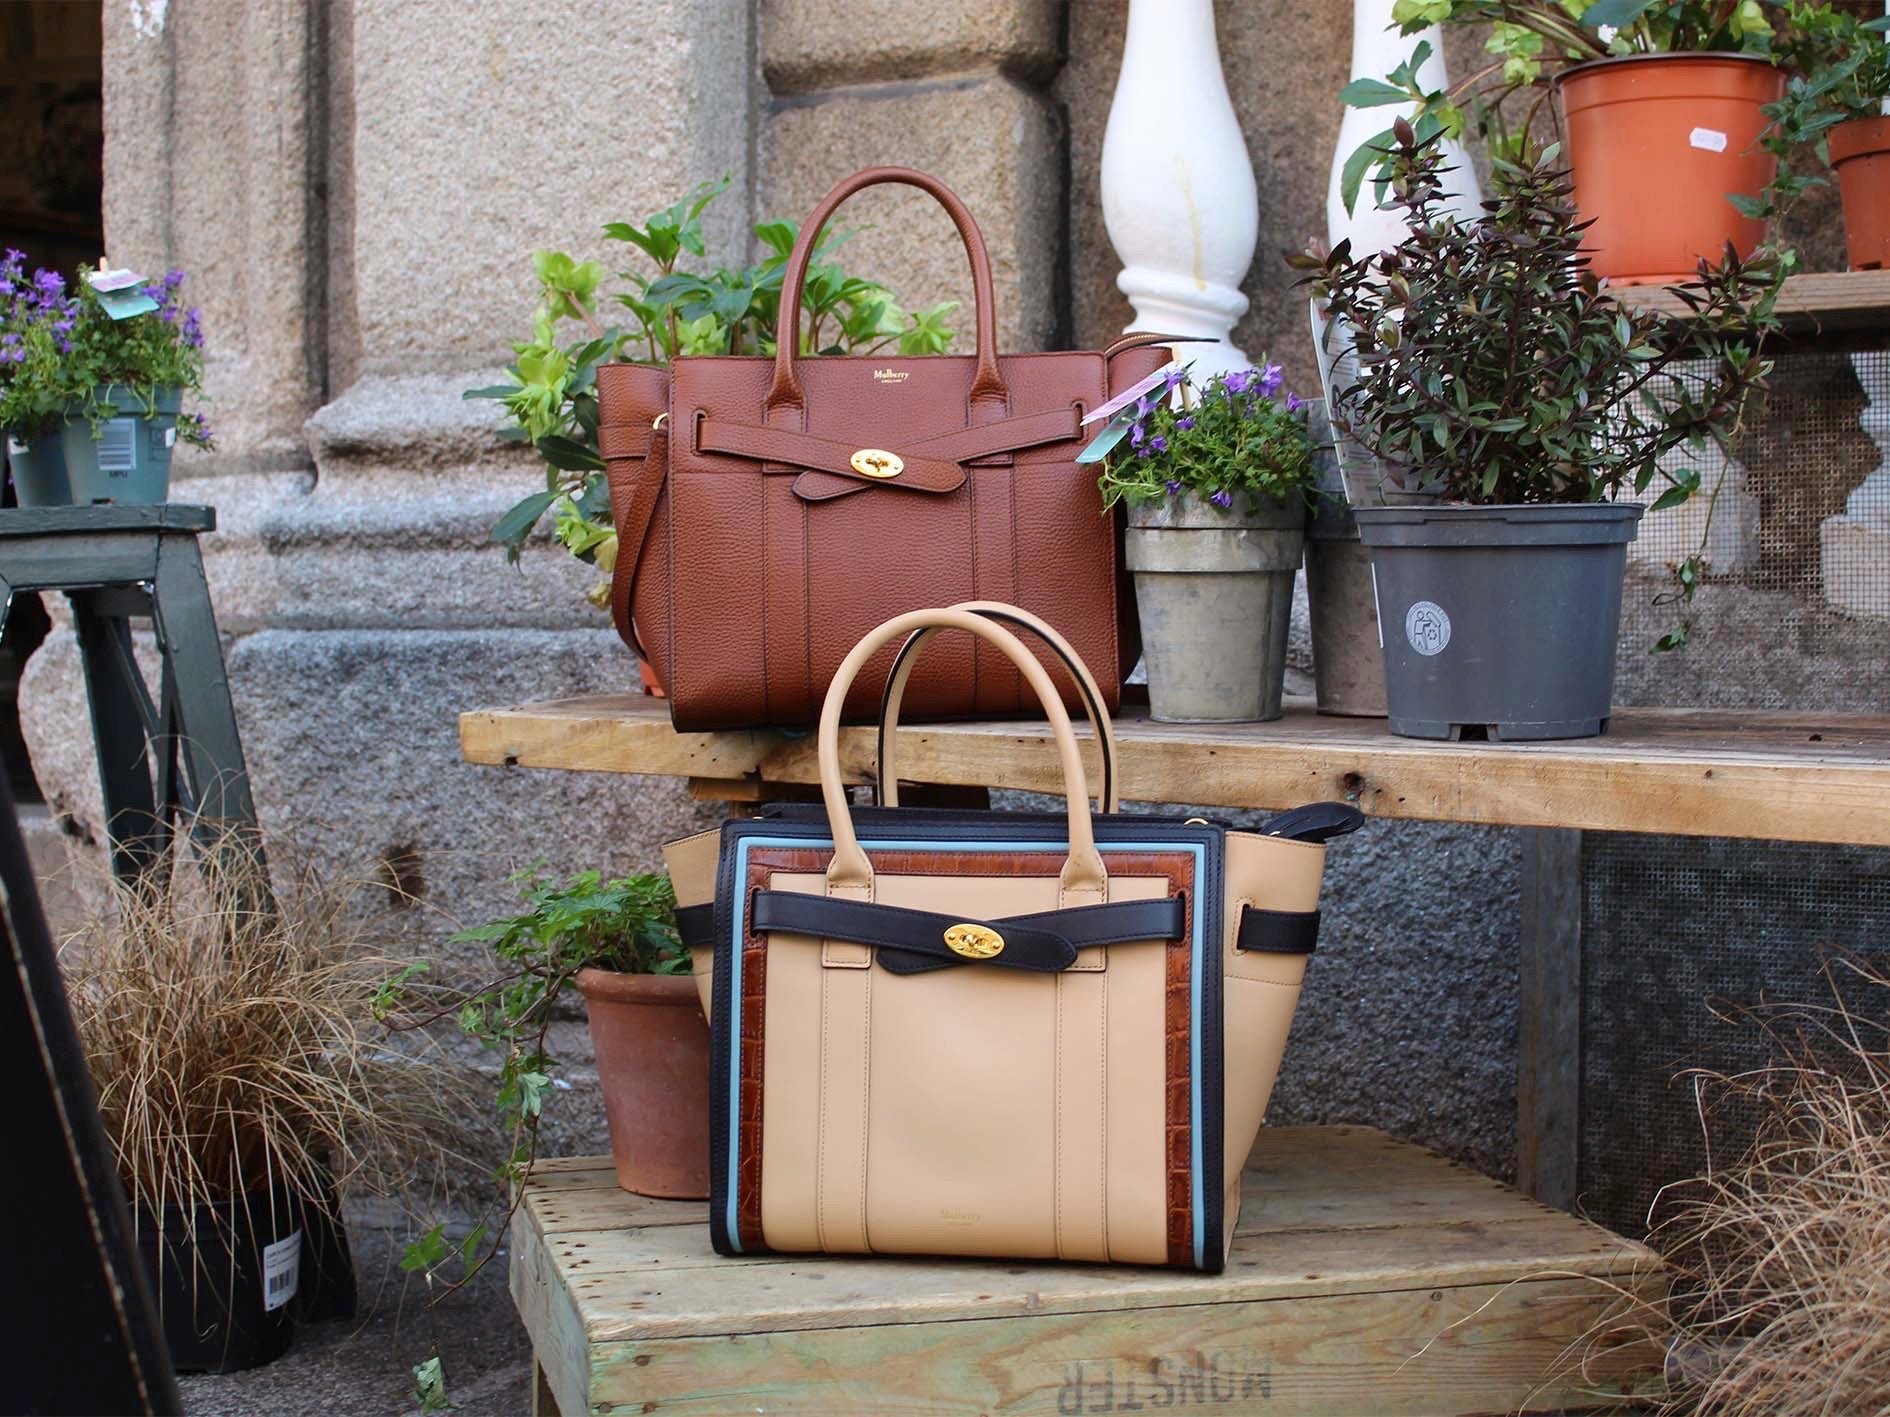 What's A Classic Mulberry Bag? The Bayswater Exchange Ltd